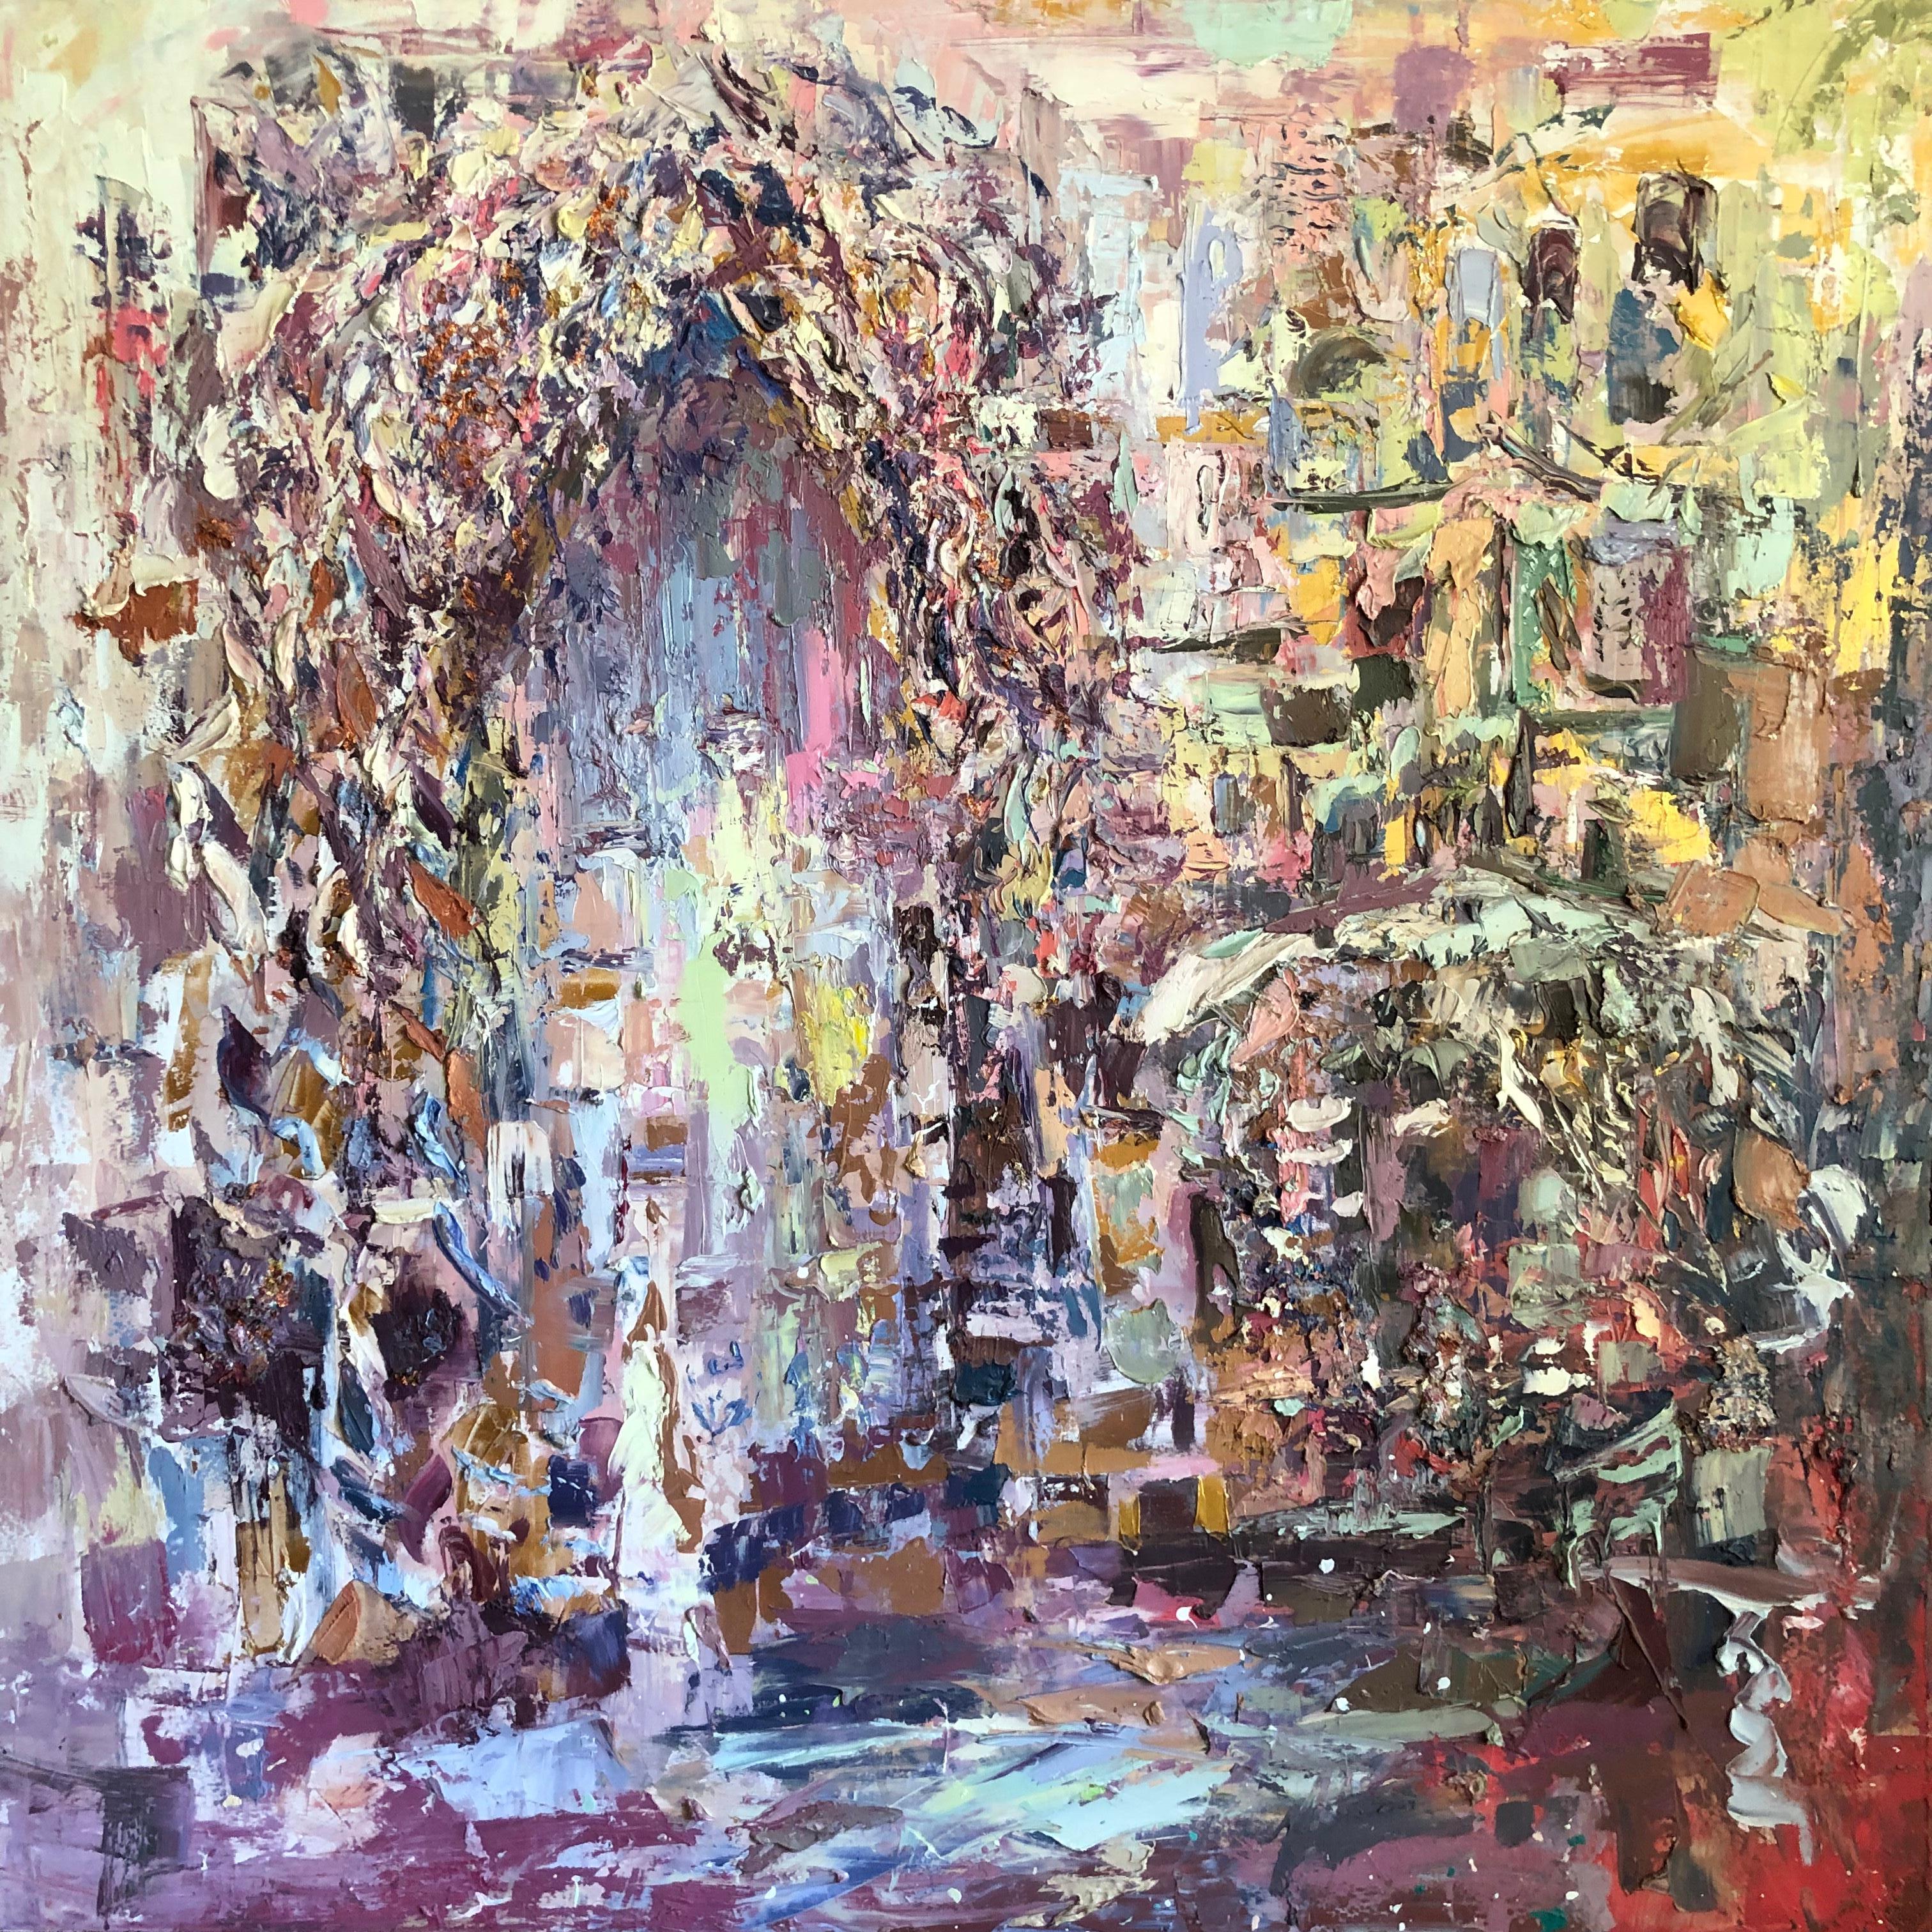 "AD 3.23" Abstract Painting 59" x 59" inch by Ahmed Dafrawy 

Dafrawy’s fine arts academic background started in 2014 when he received the certificate of drawing course completion from the Faculty of Art & Education located in Zamalek Cairo, Egypt.